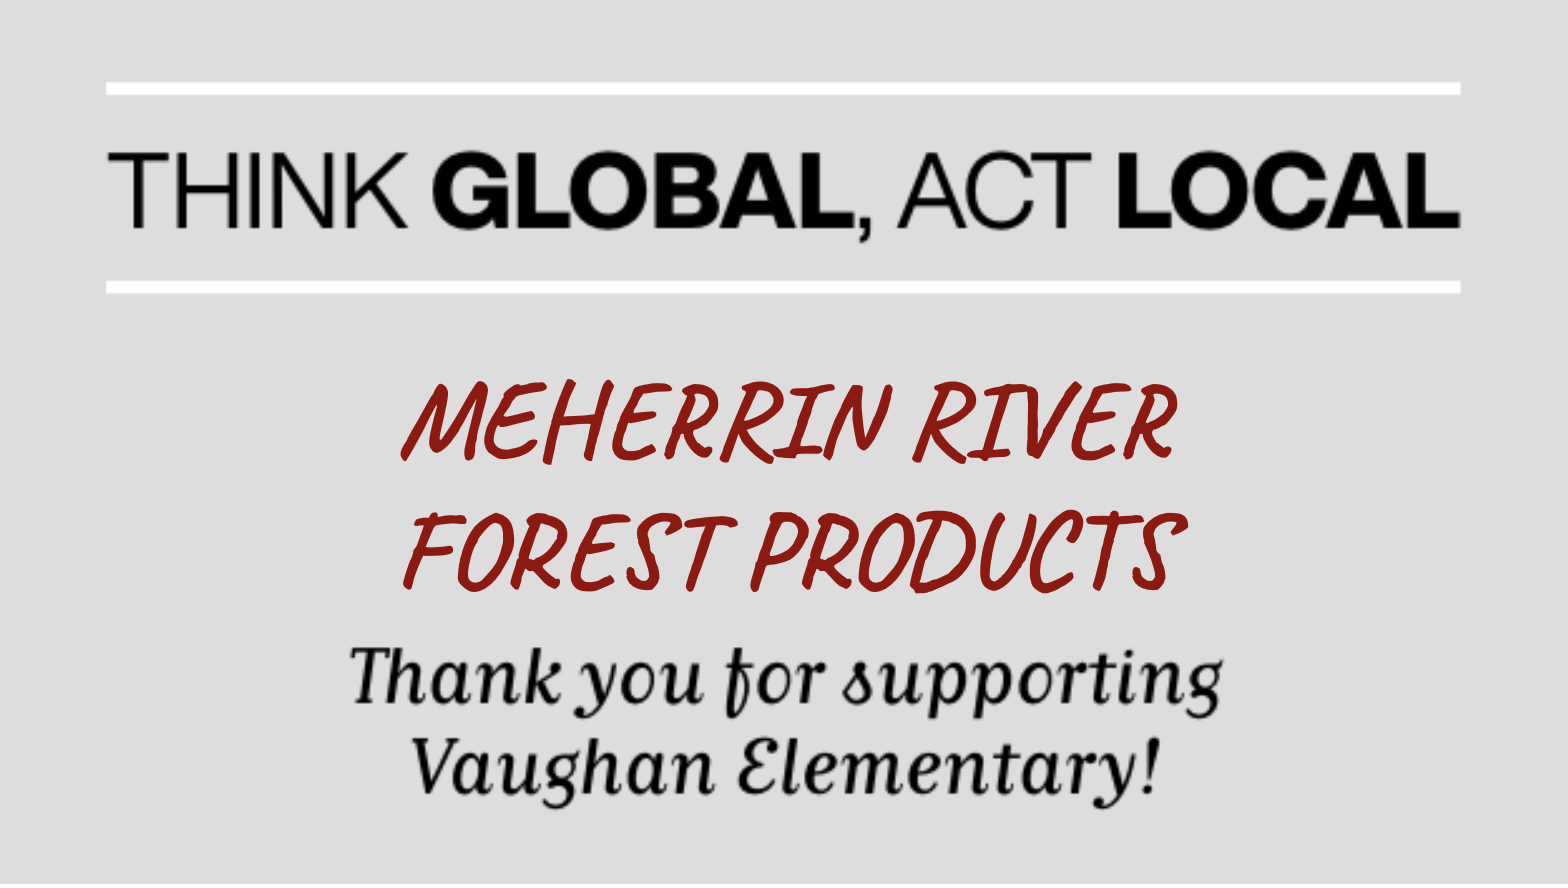 MEHERRIN RIVER FOREST PRODUCTS